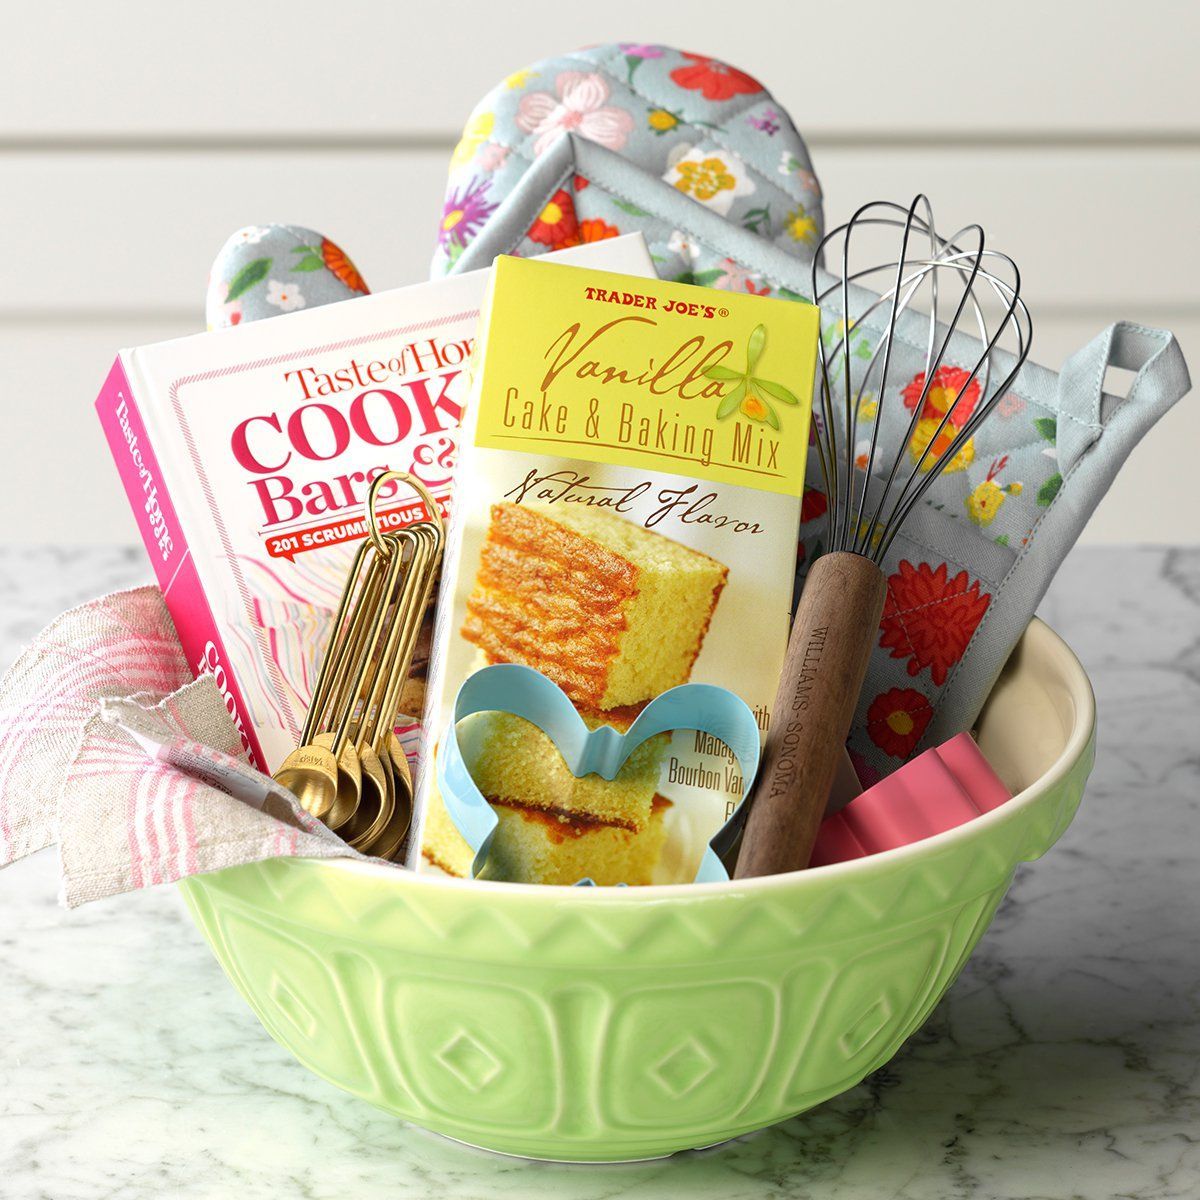 How to Make the Sweetest Gift Basket for Your Favorite Baker -   16 holiday Baking basket ideas